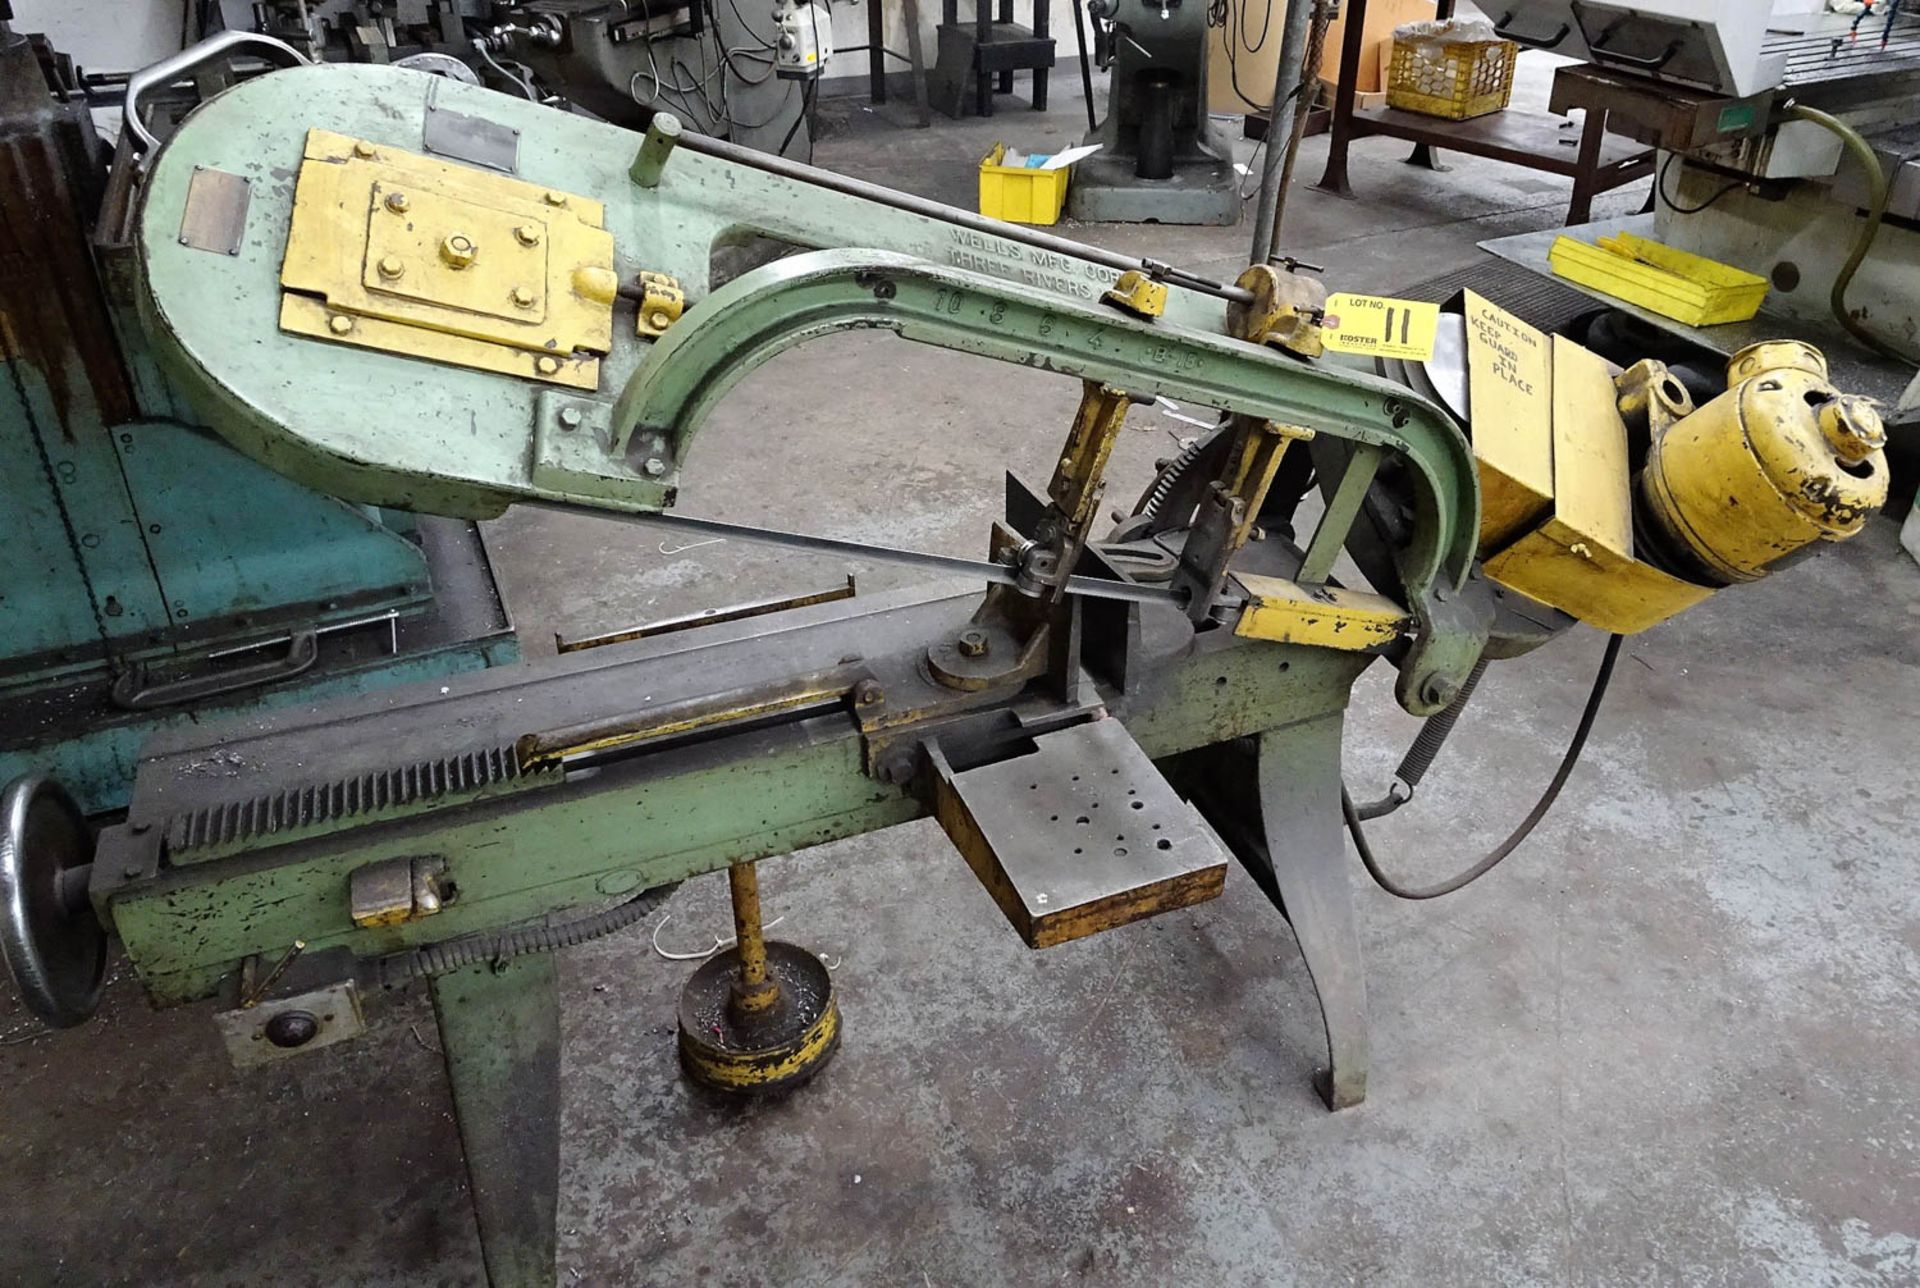 WELLS MDL. 8-M-40 HORIZONTAL METAL CUT OFF BANDSAW WITH APPROXIMATELY 8 INCH WIDTH CUTTING CAPACITY, - Image 2 of 2